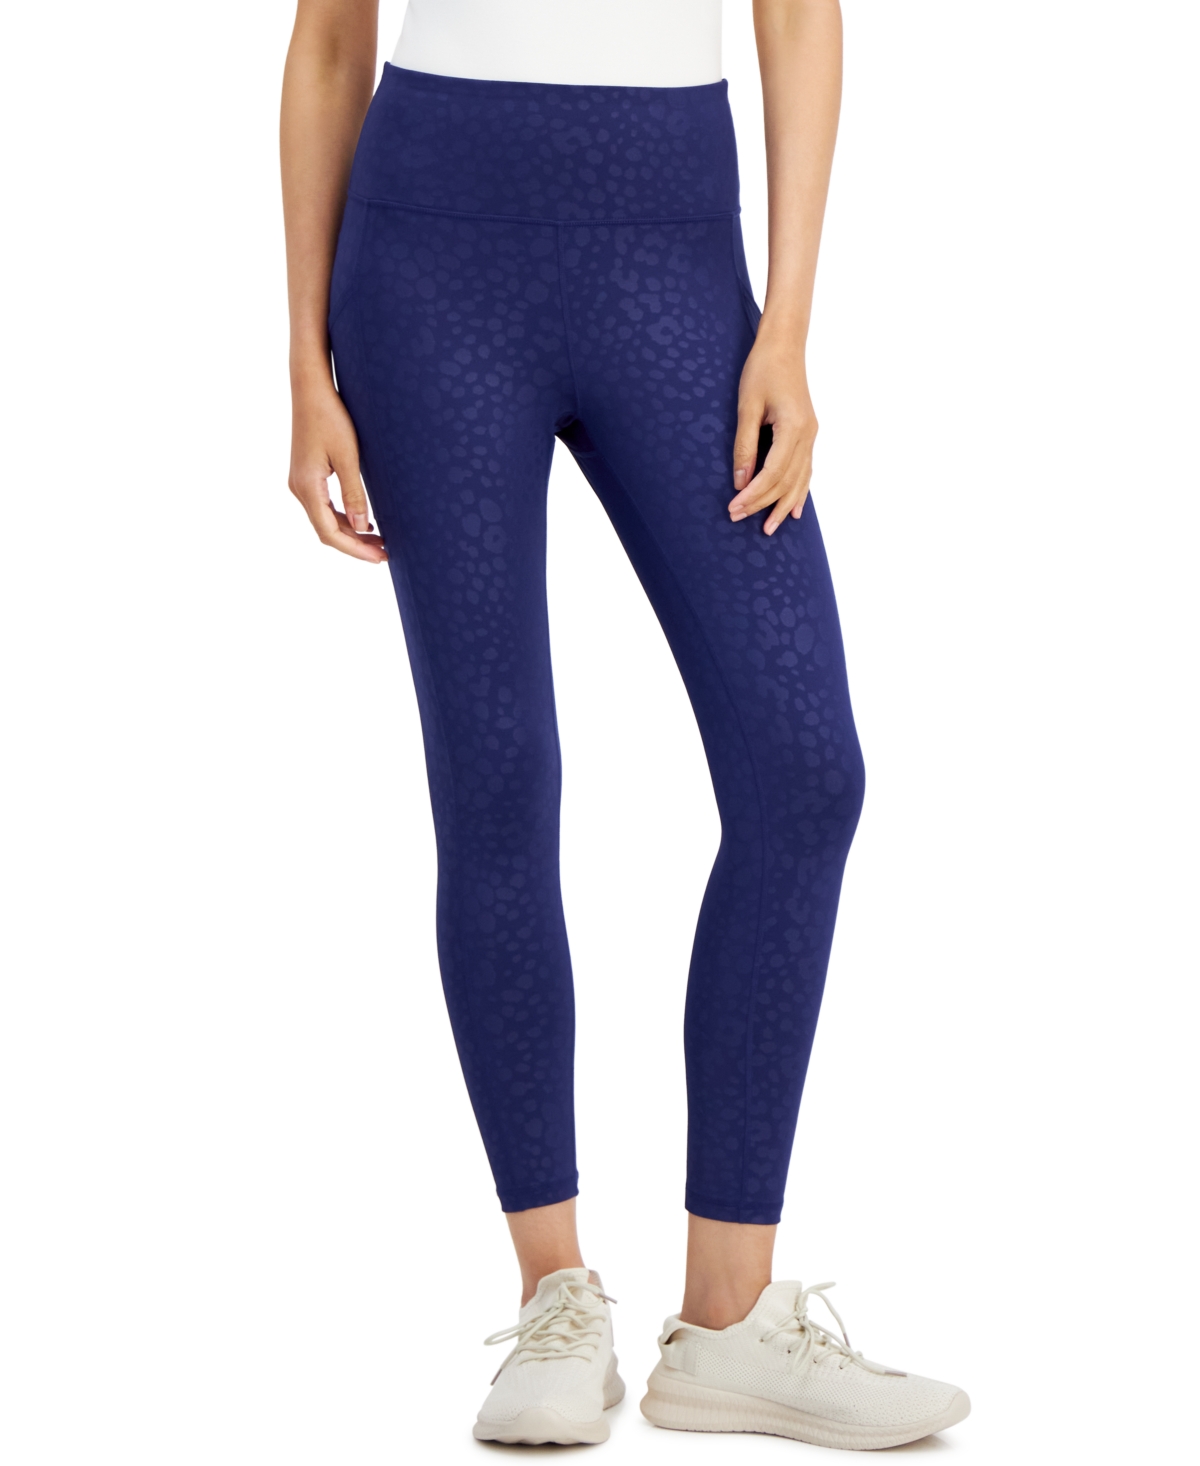 Women's Embossed 7/8-Length Compression Leggings, Created for Macy's - Tartan Blue